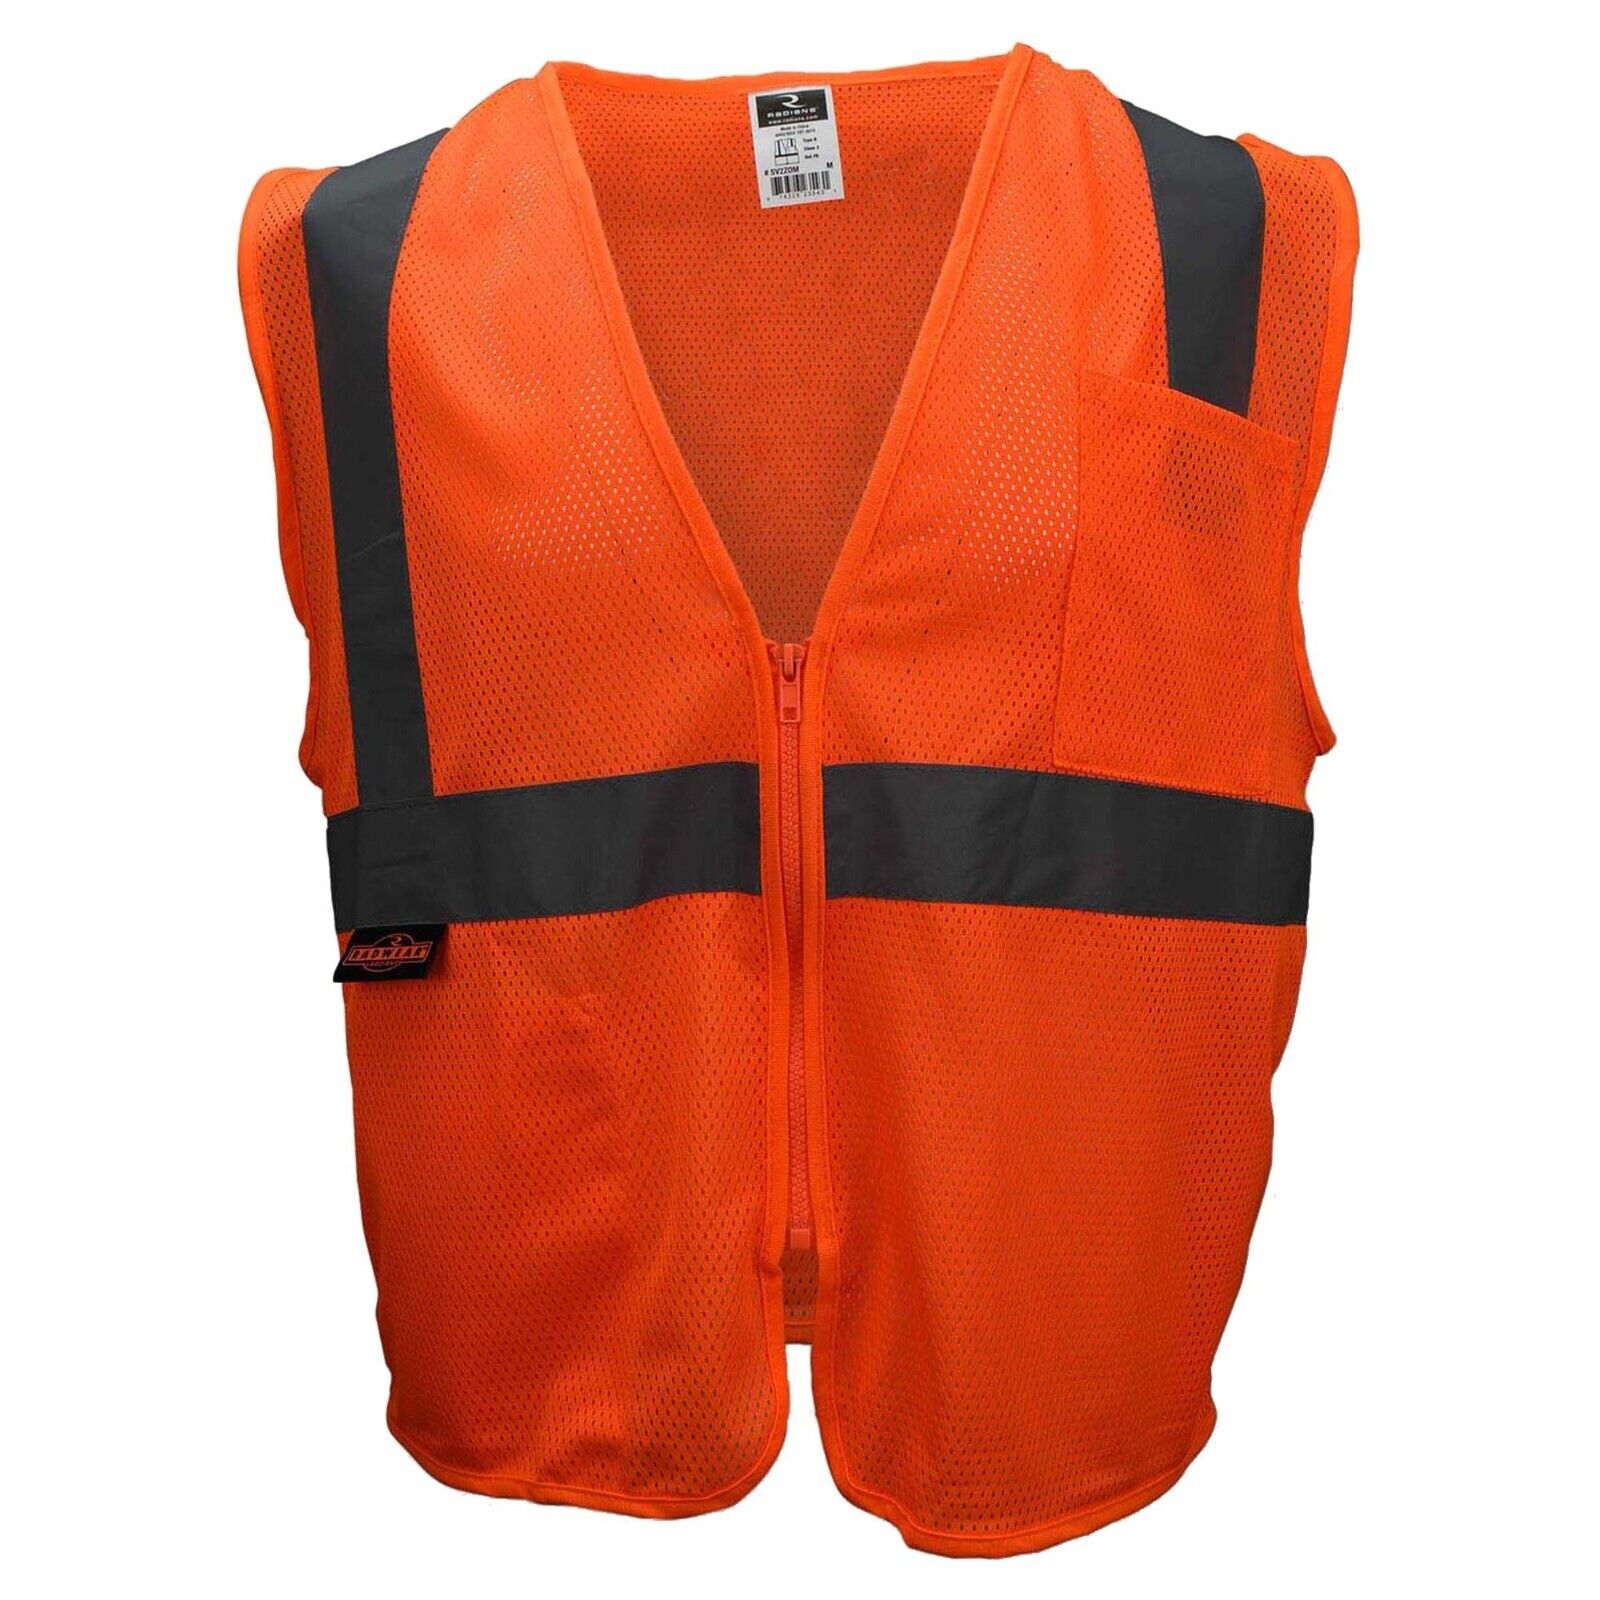 HIVIS ANSI CLASS 2 HIGH VISIBILITY REFLECTIVE ROAD WORK CONSTRUCTION SAFETY VEST